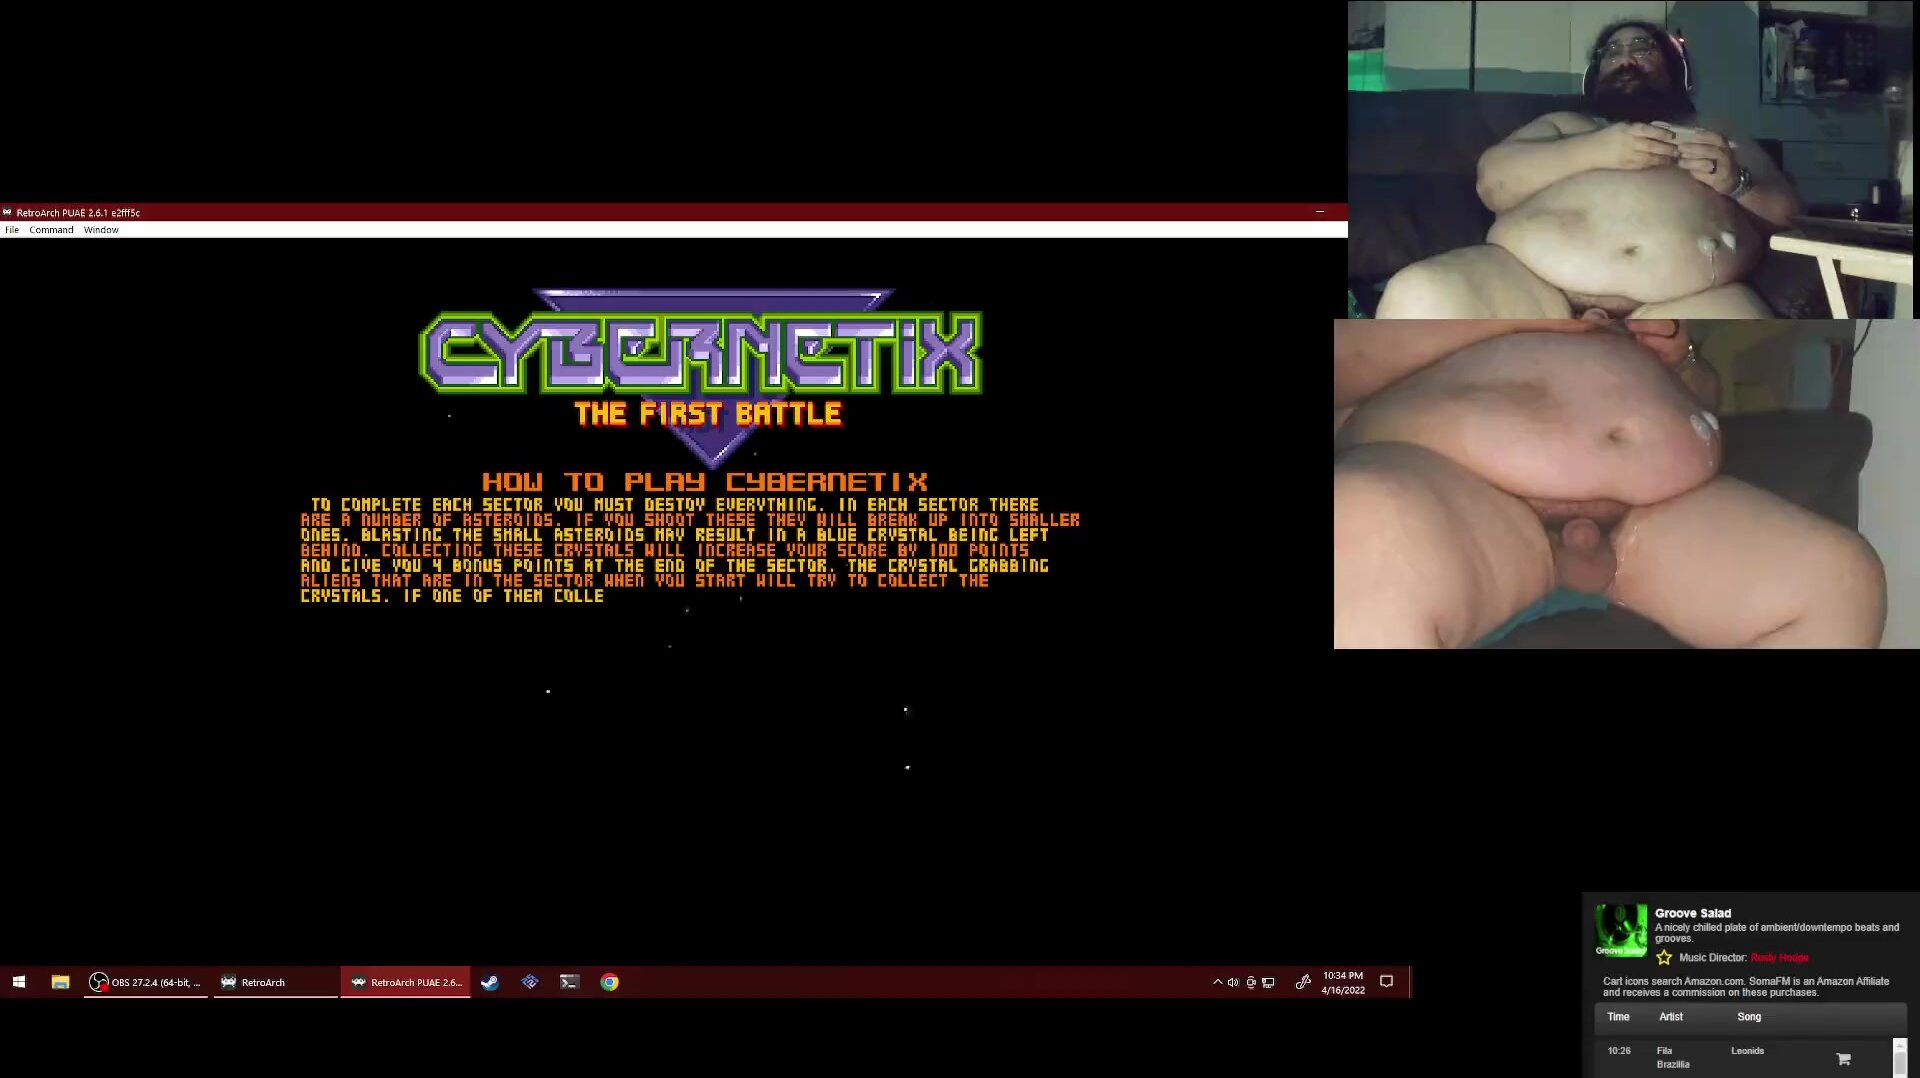 stoned naked gaming: dad's amiga collection part 2